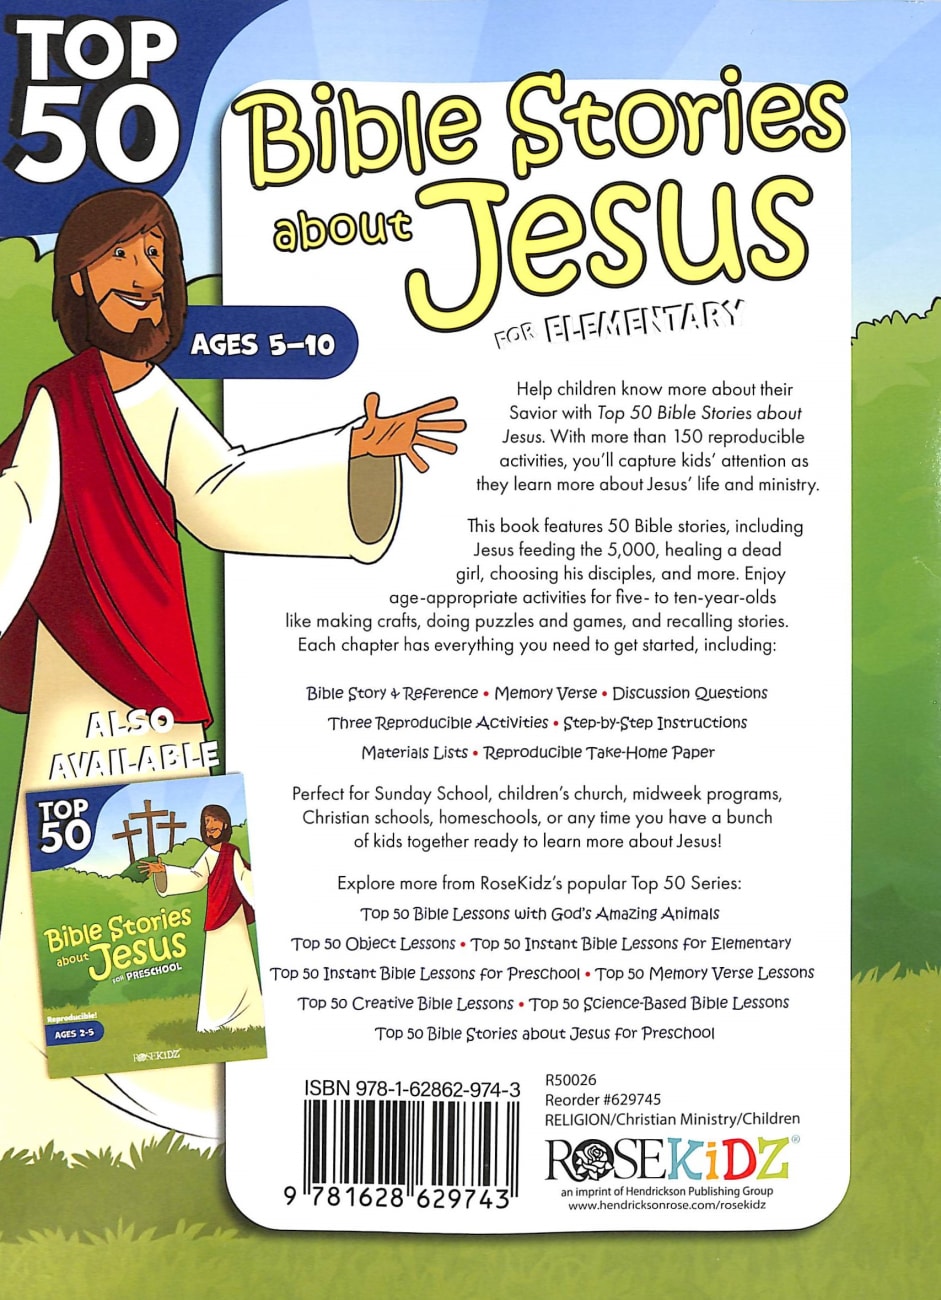 Top 50 Bible Stories About Jesus For Elementary (Ages 5-10) (Rosekidz Top  50 Series) by Rosekidz | Koorong